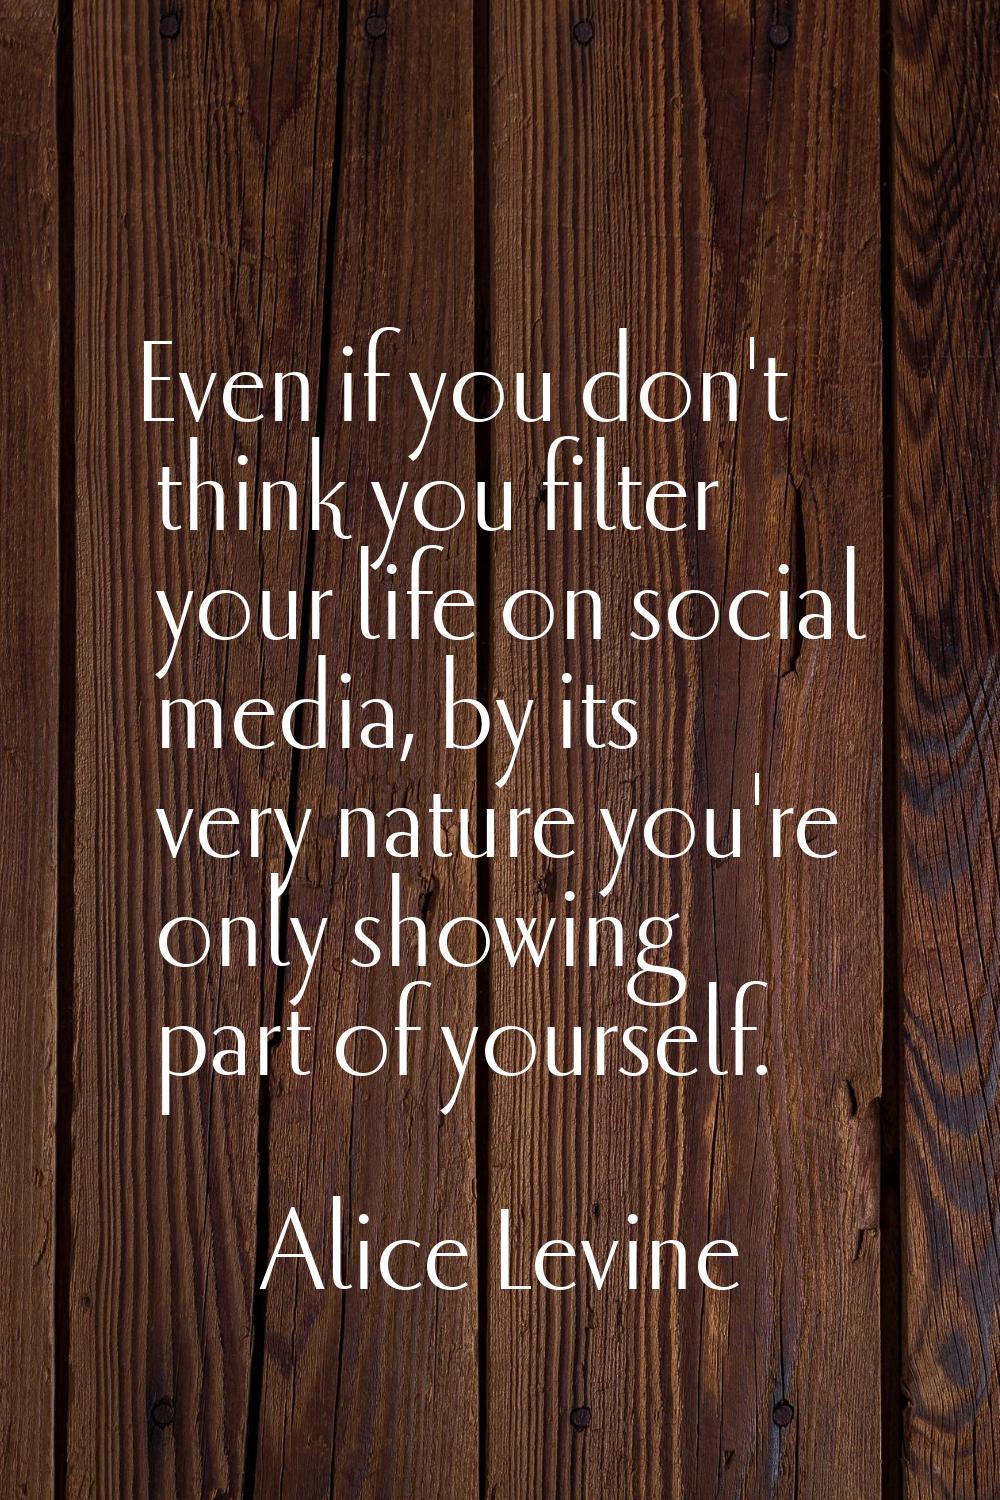 Even if you don't think you filter your life on social media, by its very nature you're only showin